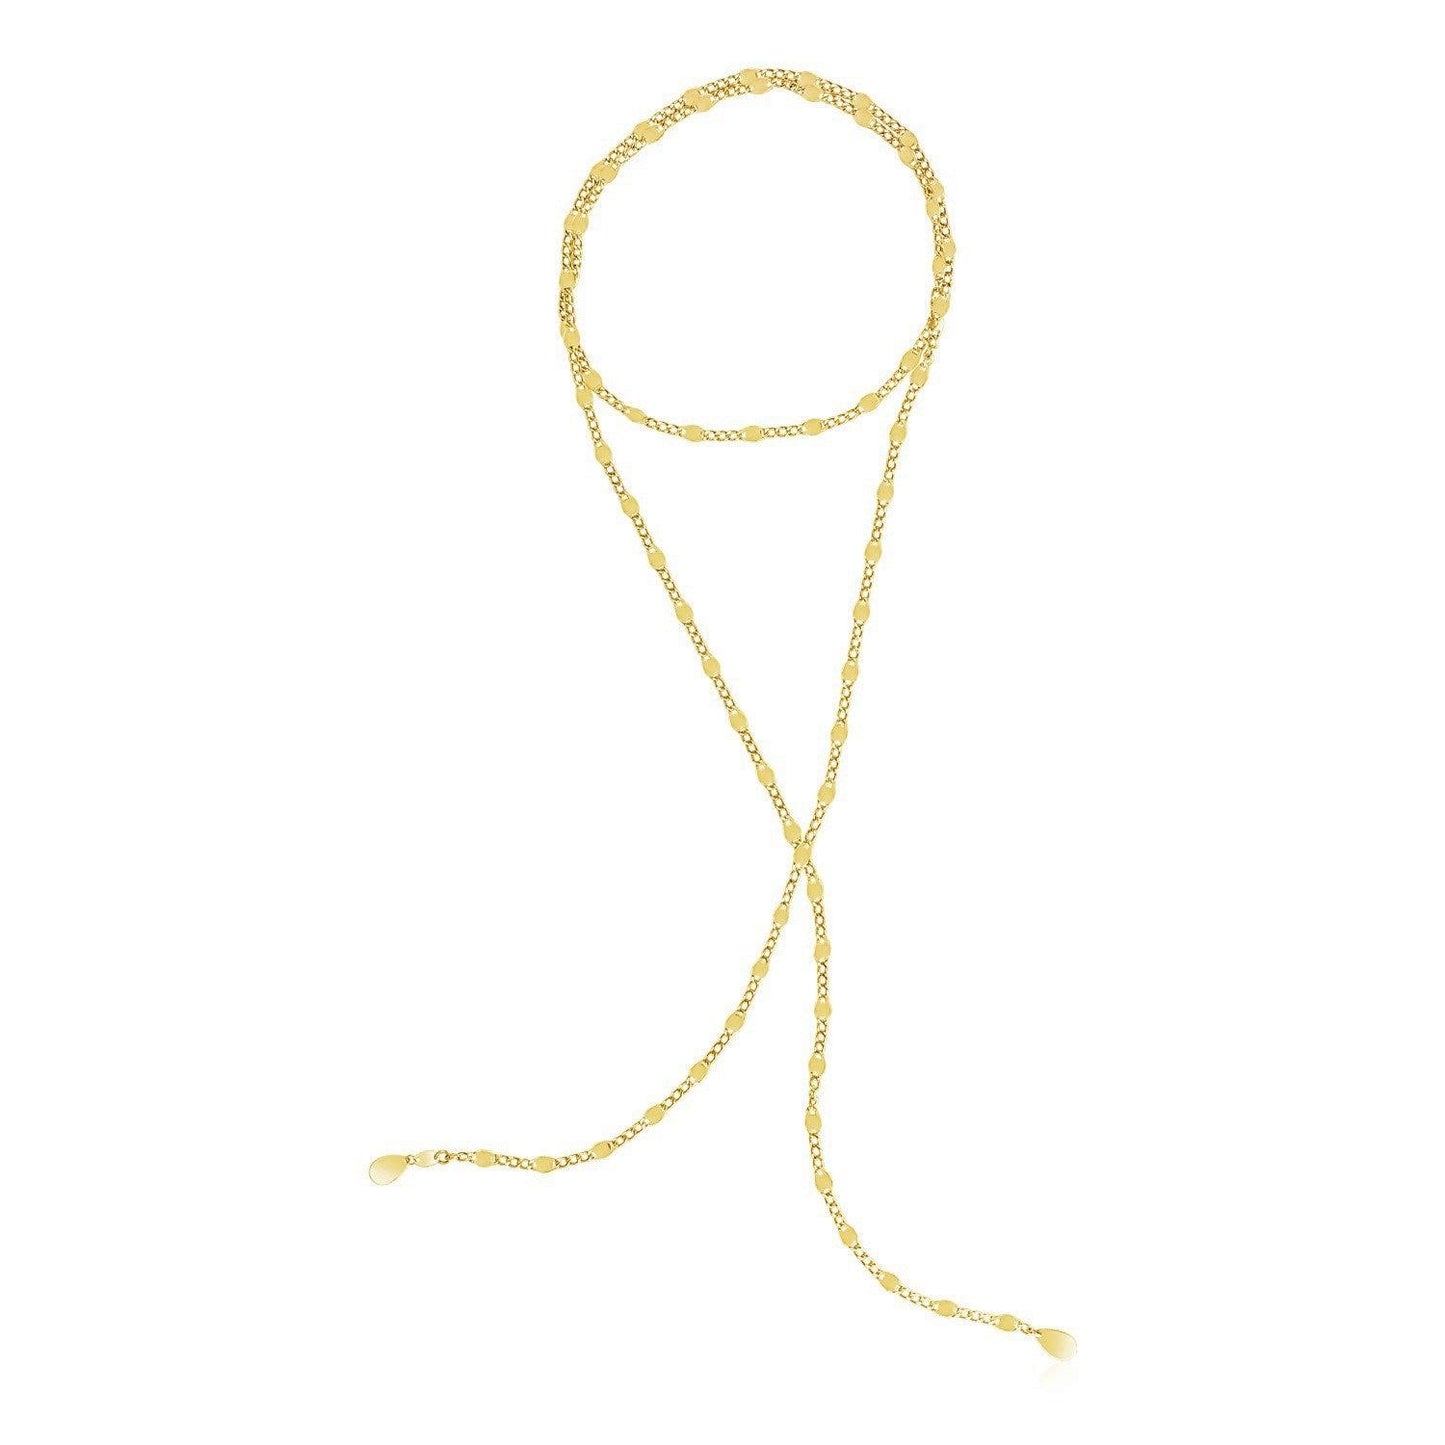 14K Yellow Gold Tie Necklace with Polished Oval Links